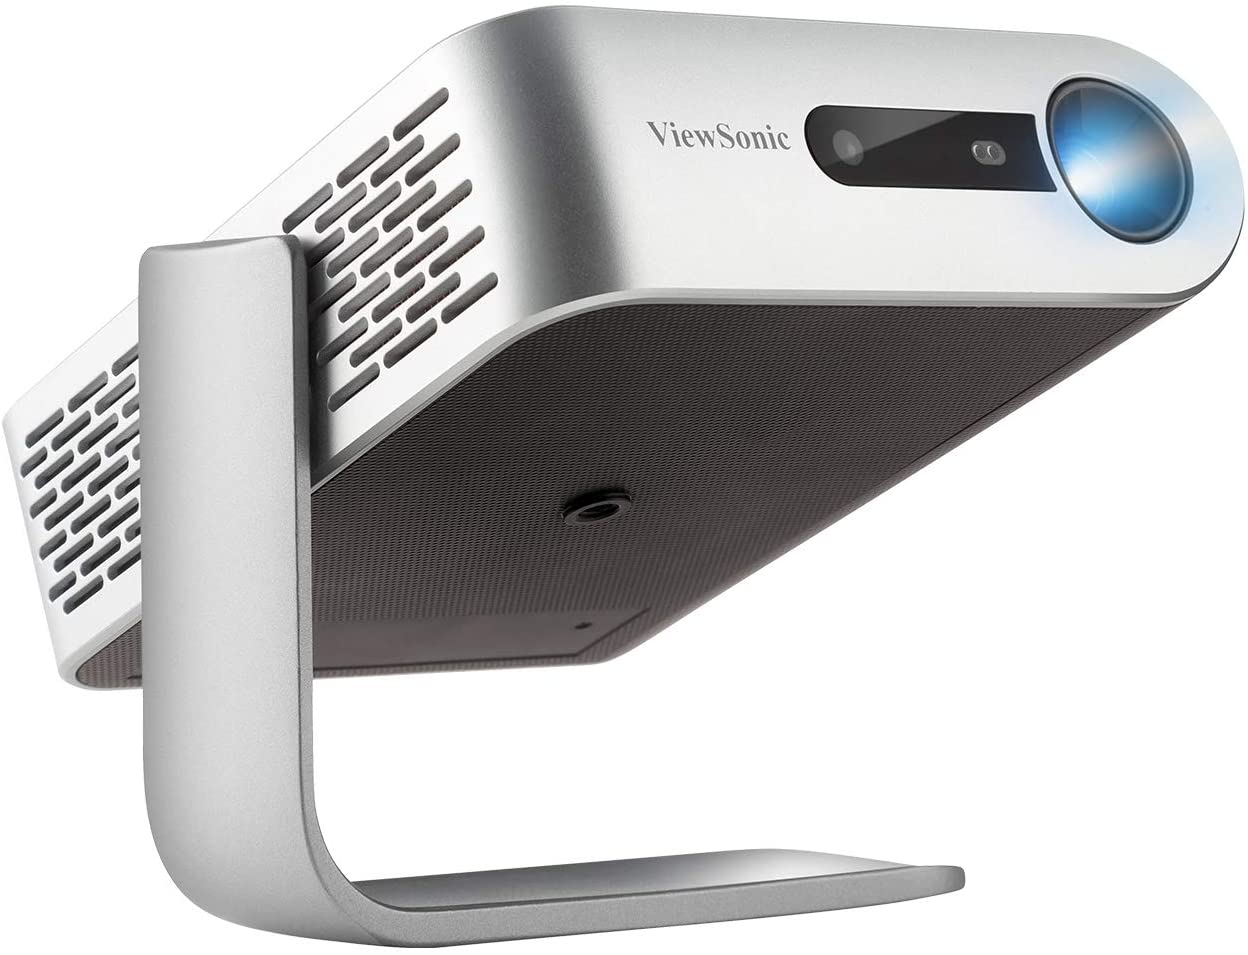 ViewSonic M1 projector for ceiling.jpg